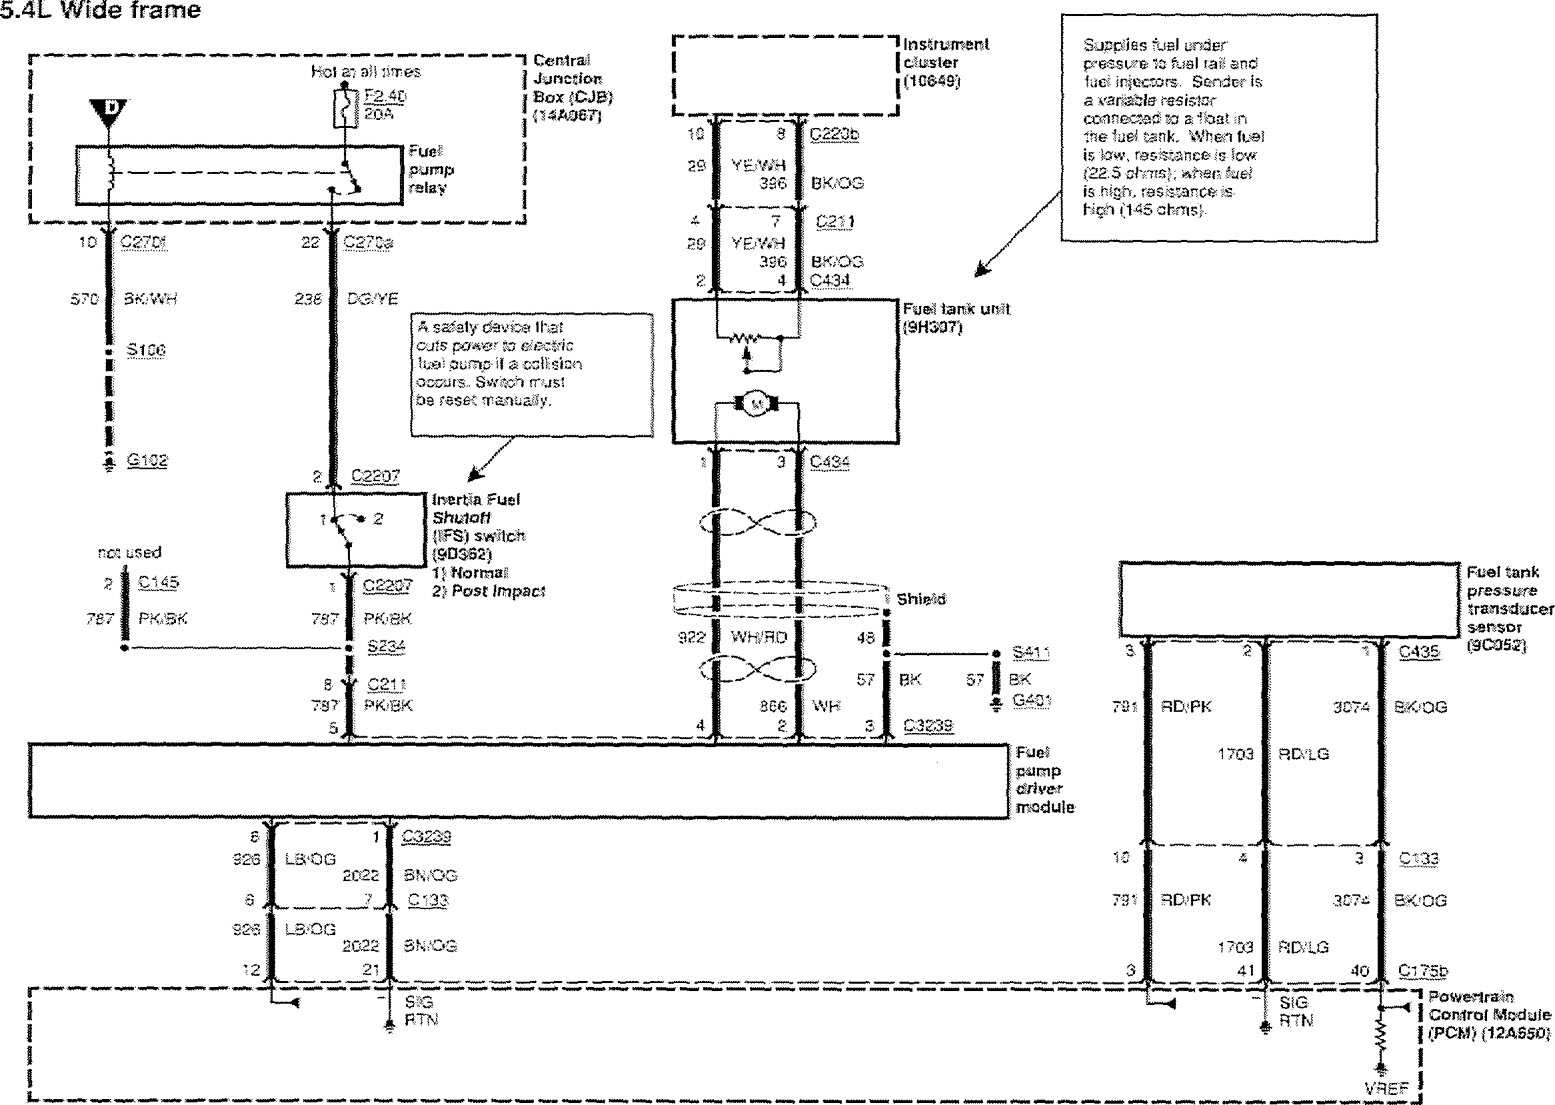 Wiring Diagram For Cat 330 F Fuel System